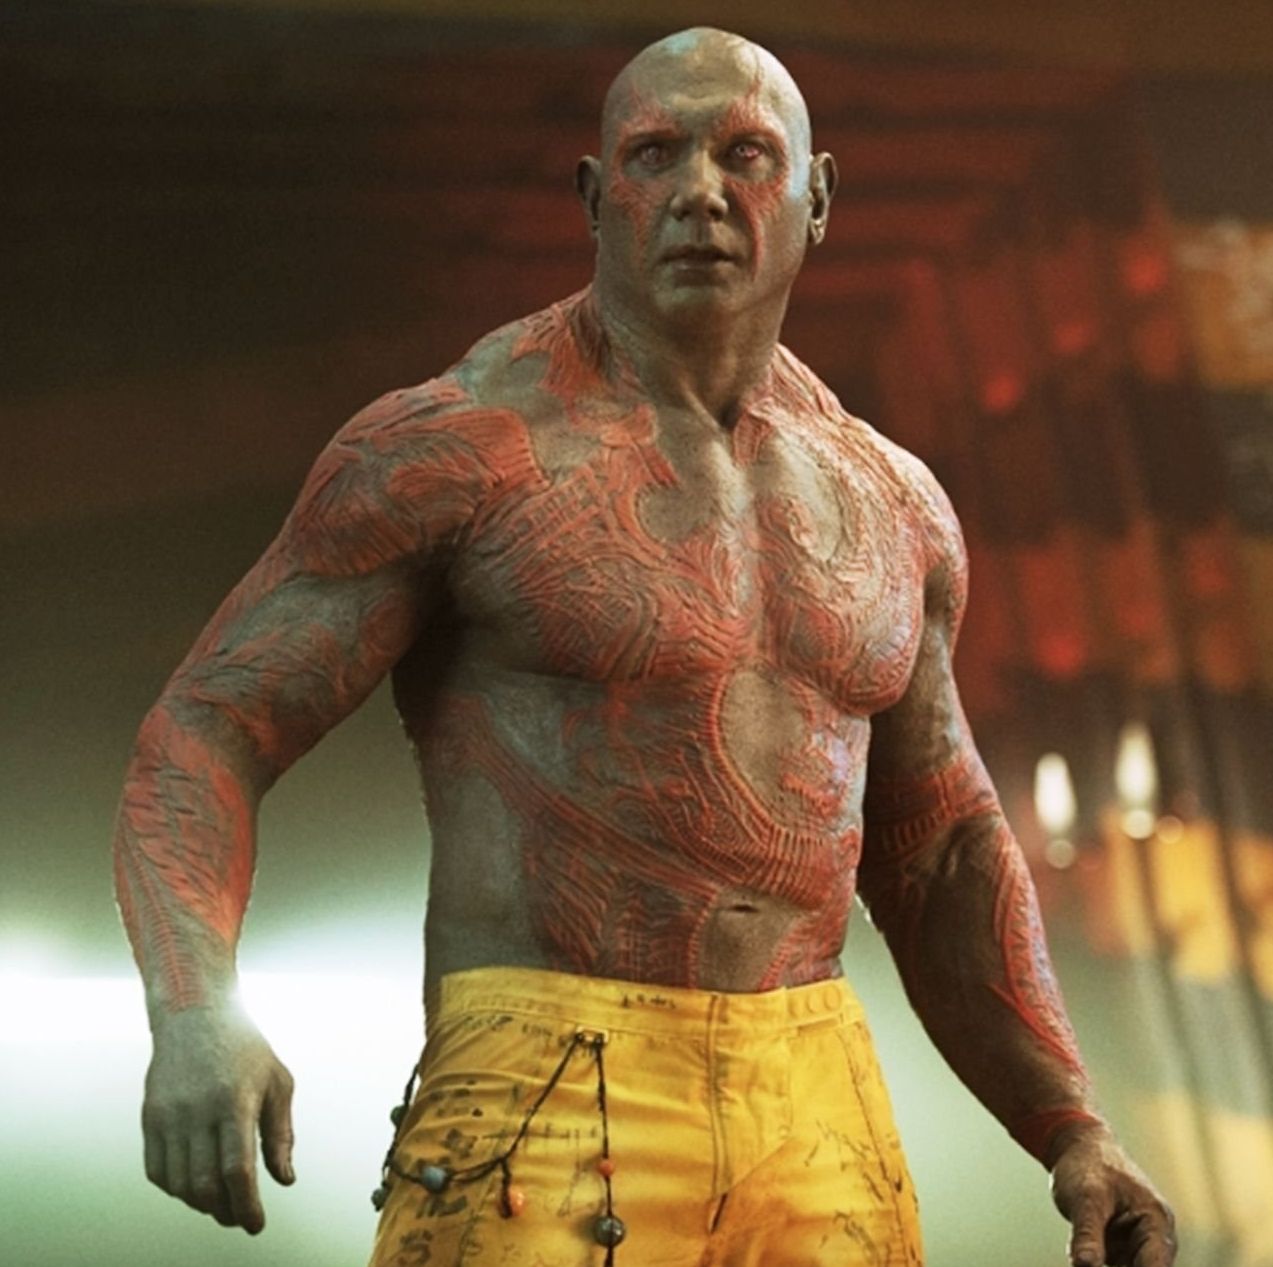 Dave Bautista as Drax the Destroyer, tattooed